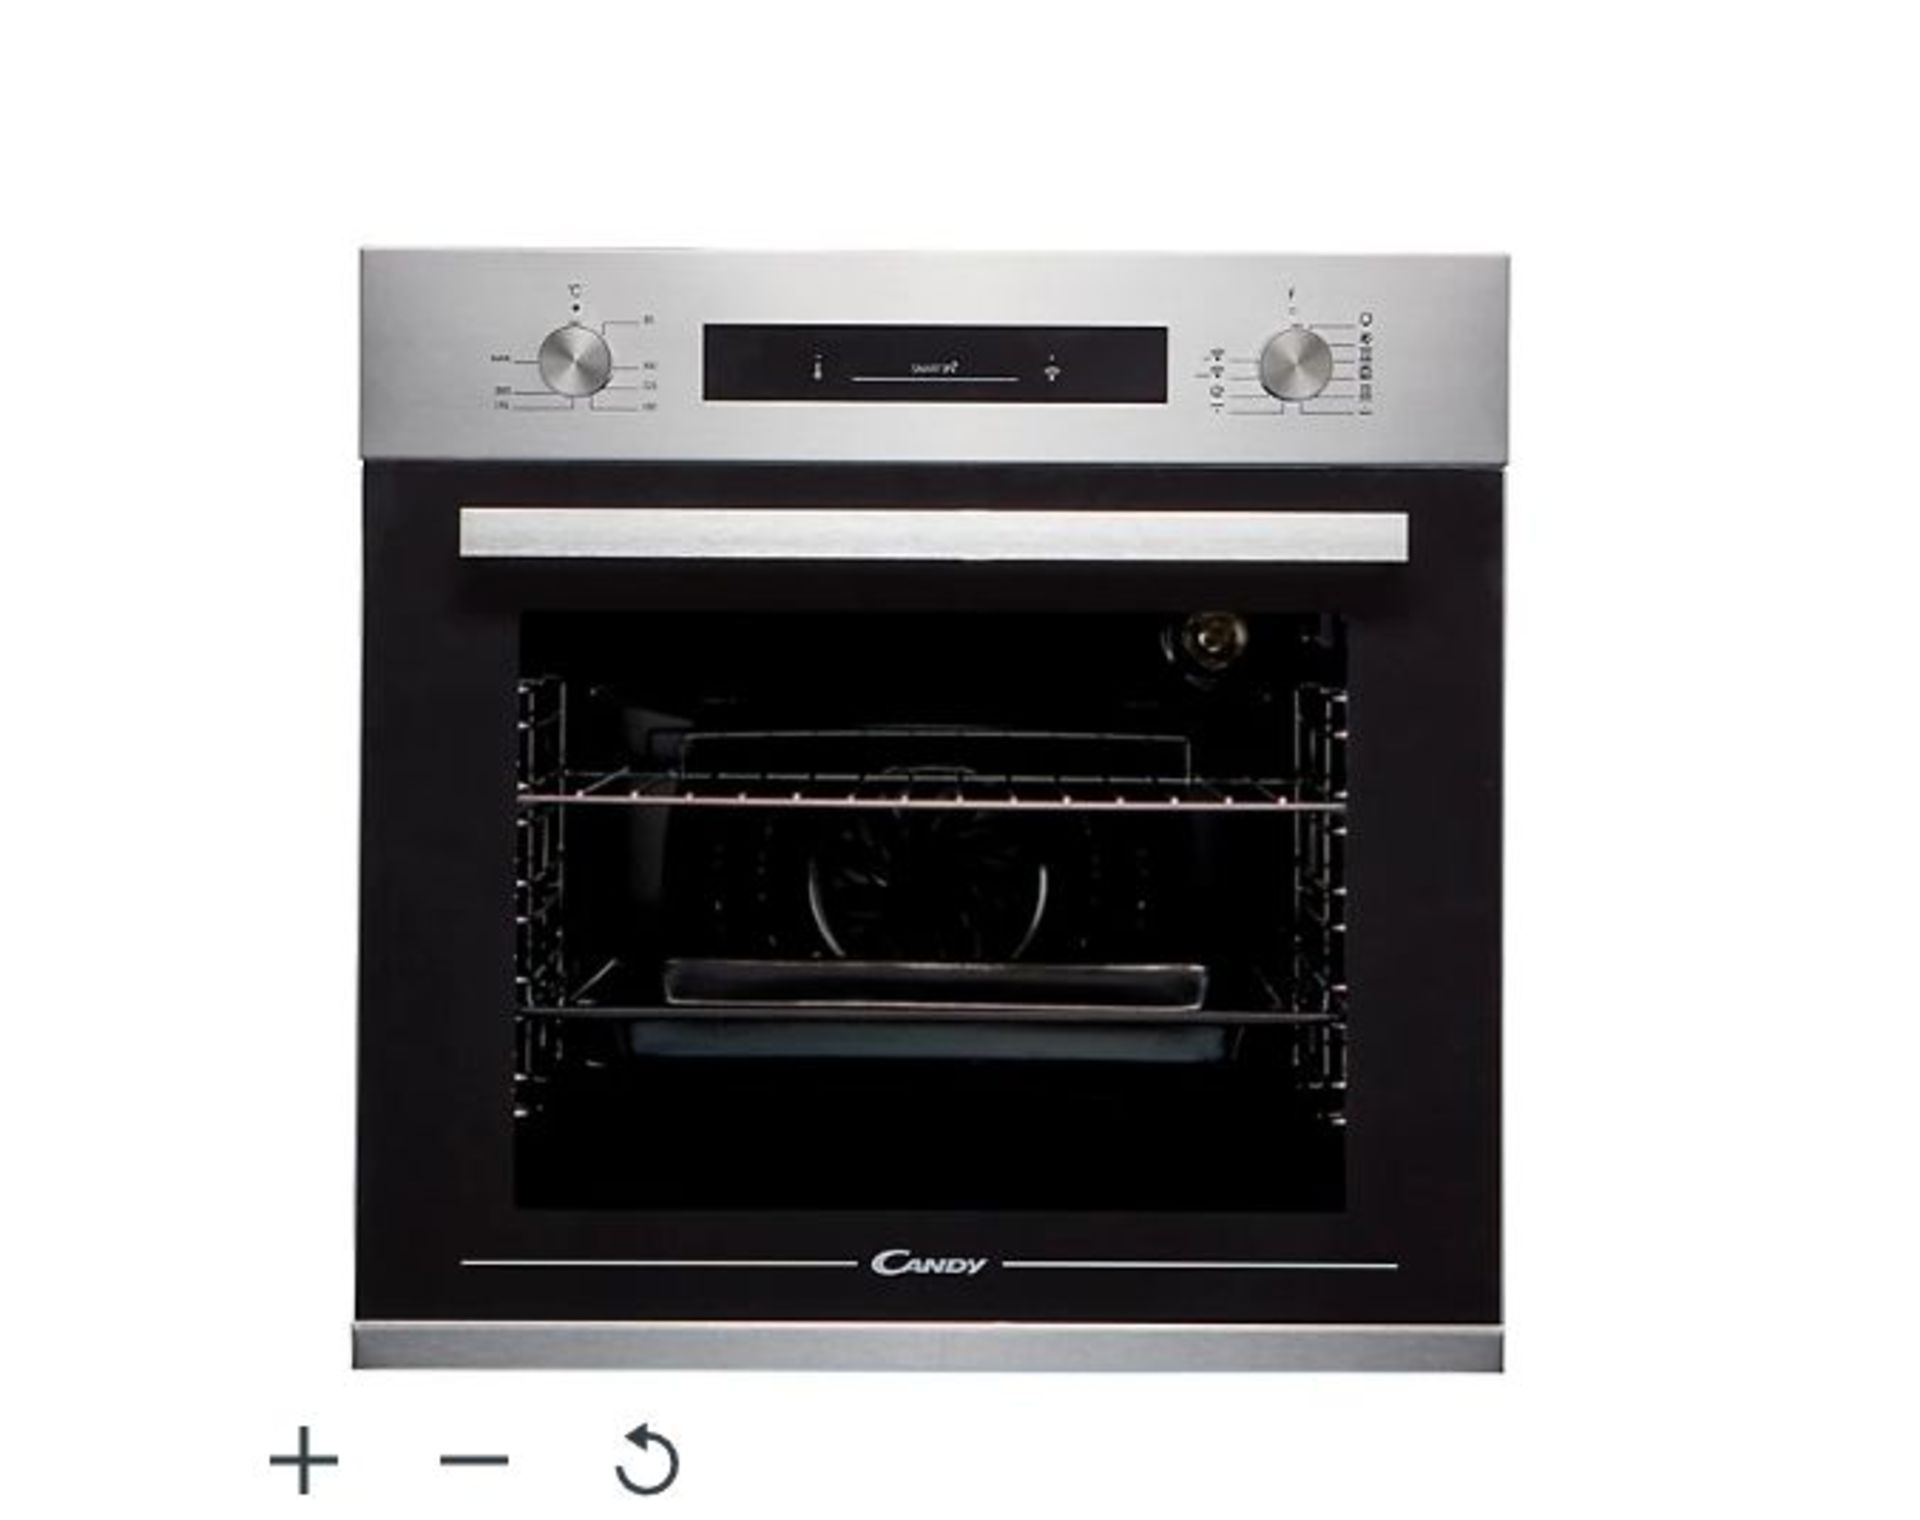 Candy FCP602X E0/E Built-in Single Oven - Black. - ER45. RRP £289.00. This 60cm multifunction oven